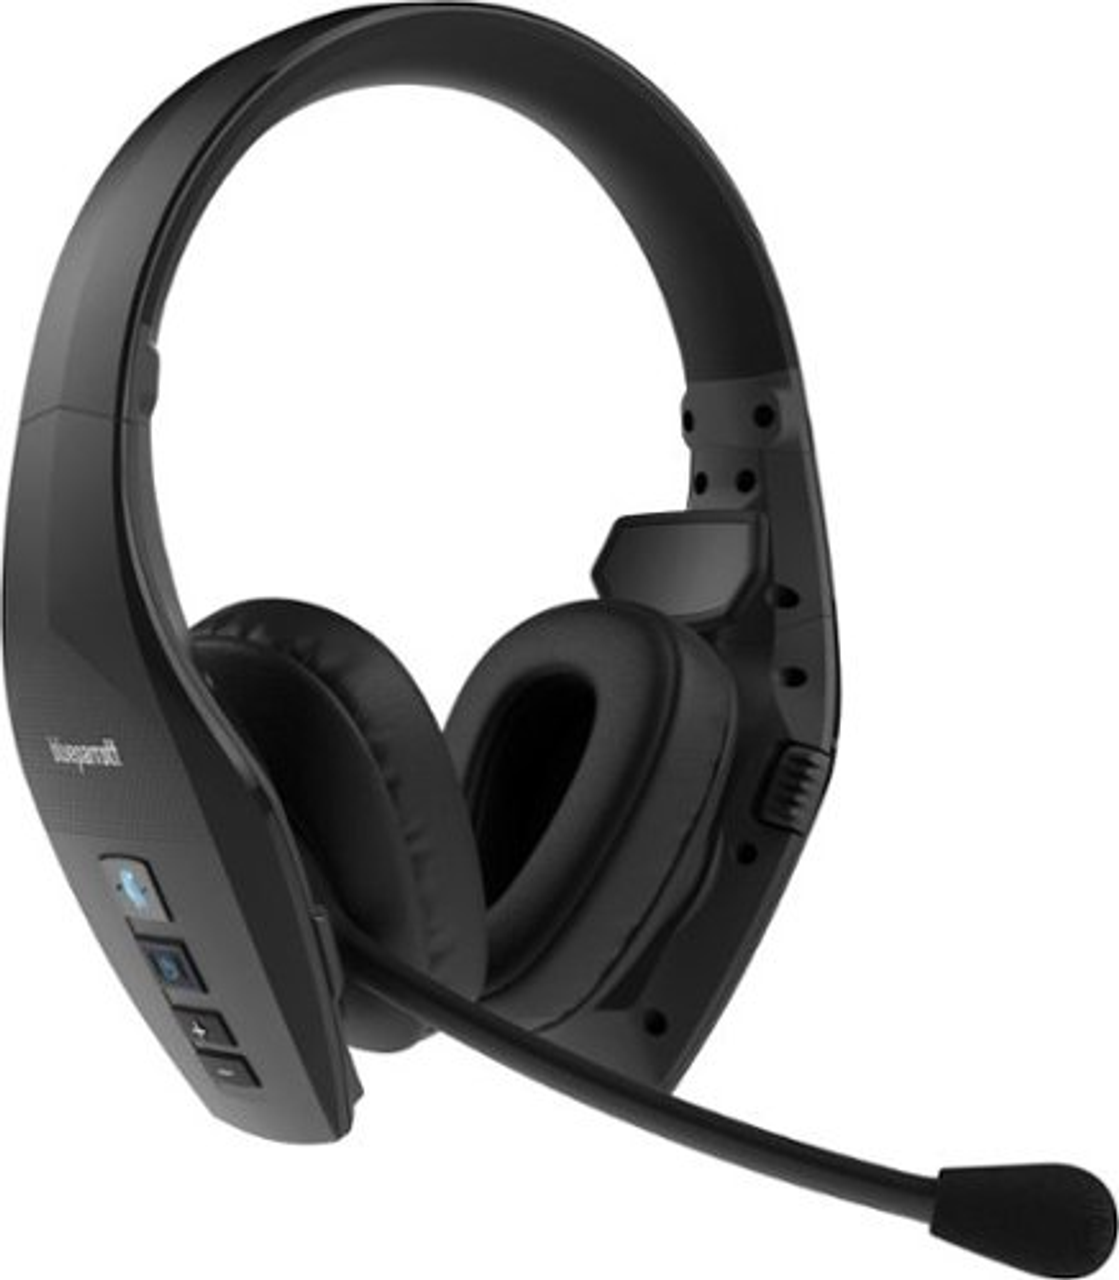 BlueParrott - S650-XT 2-in1 Convertible Wireless Headset with Active Noise Cancellation - Black